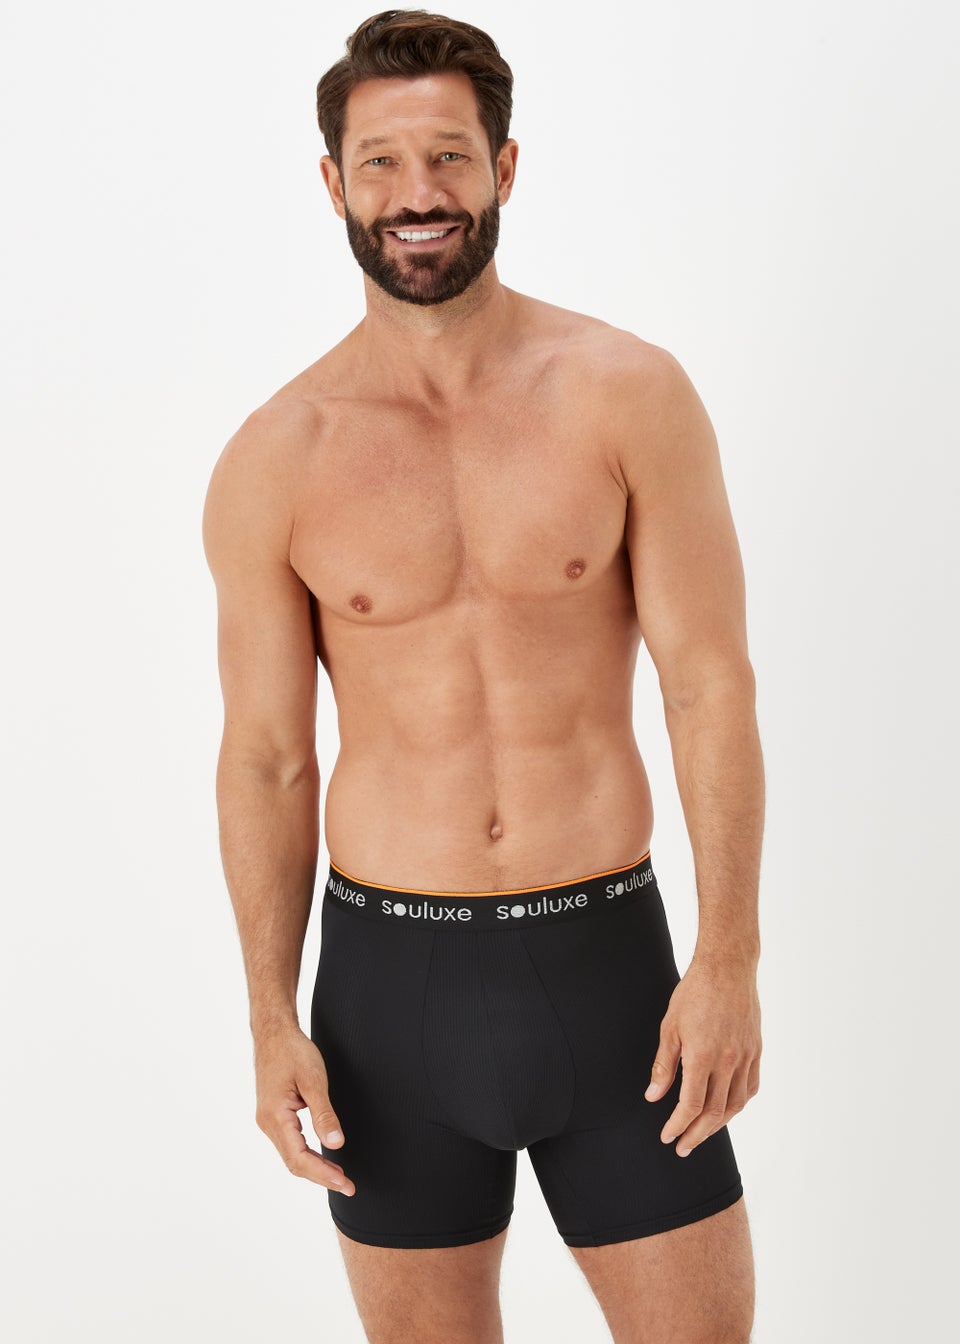 Souluxe 3 Pack Black Sports Boxers